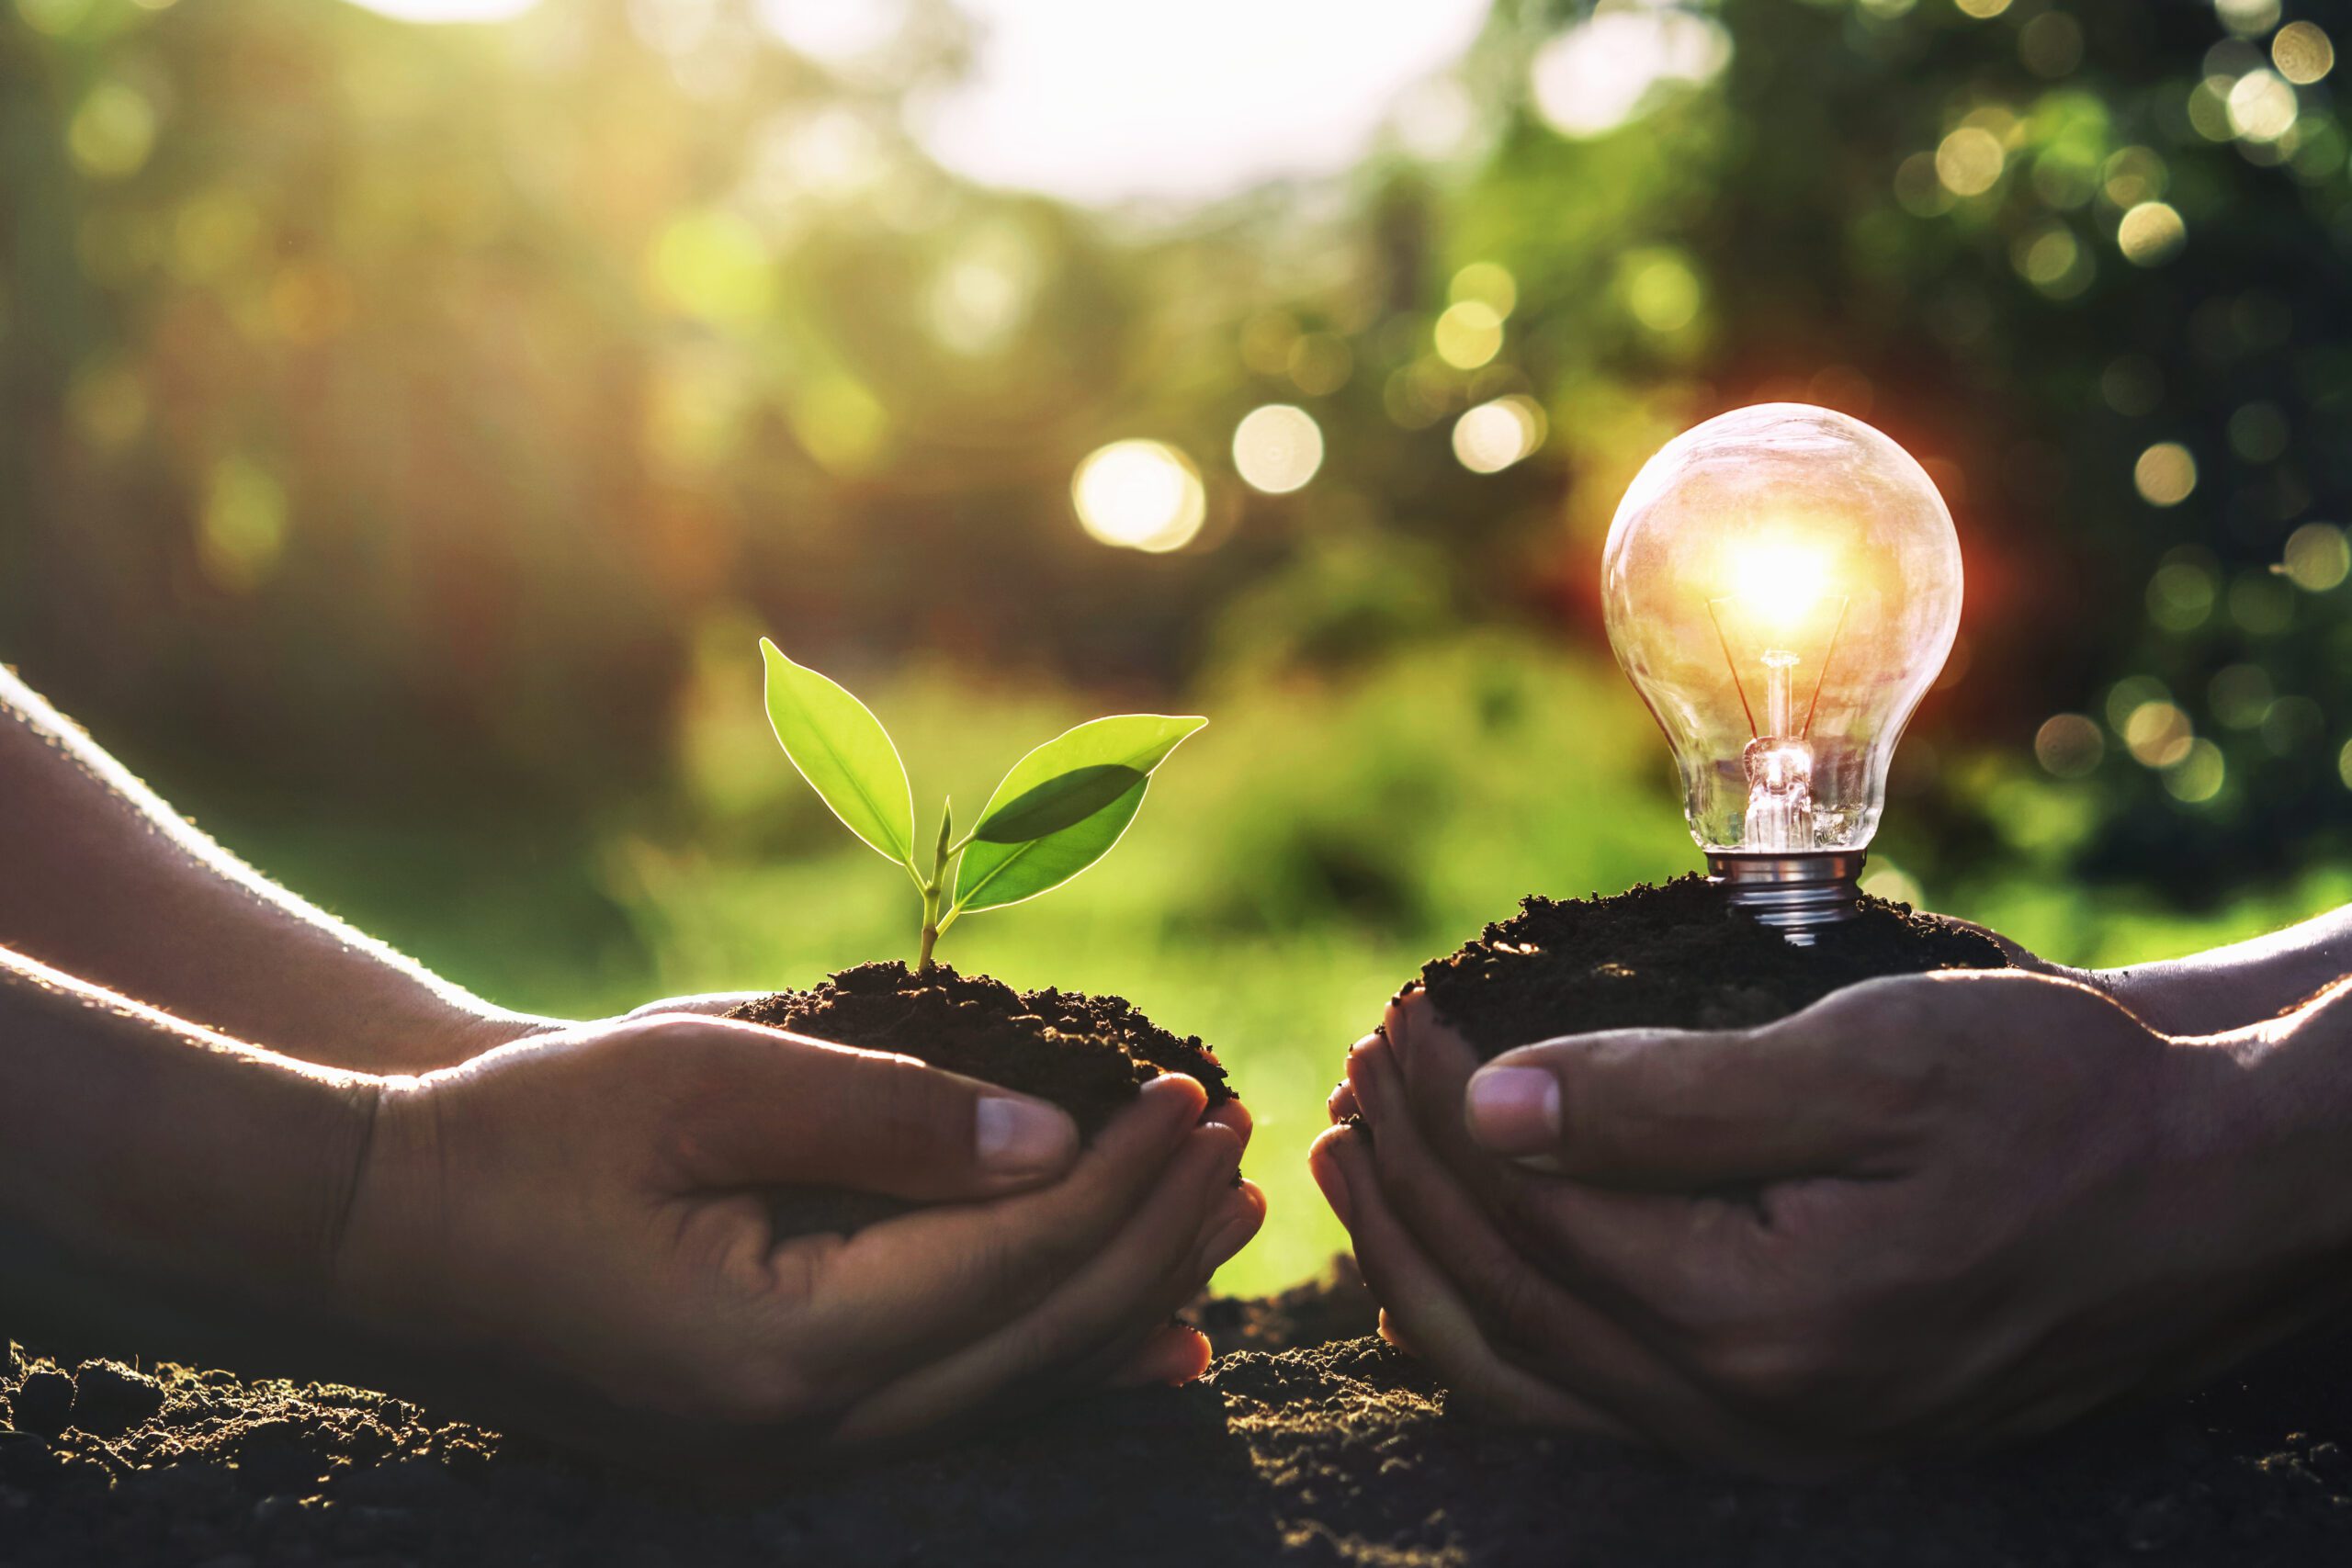 How is Sustainable Innovation Changing Industry? | FutureBusiness